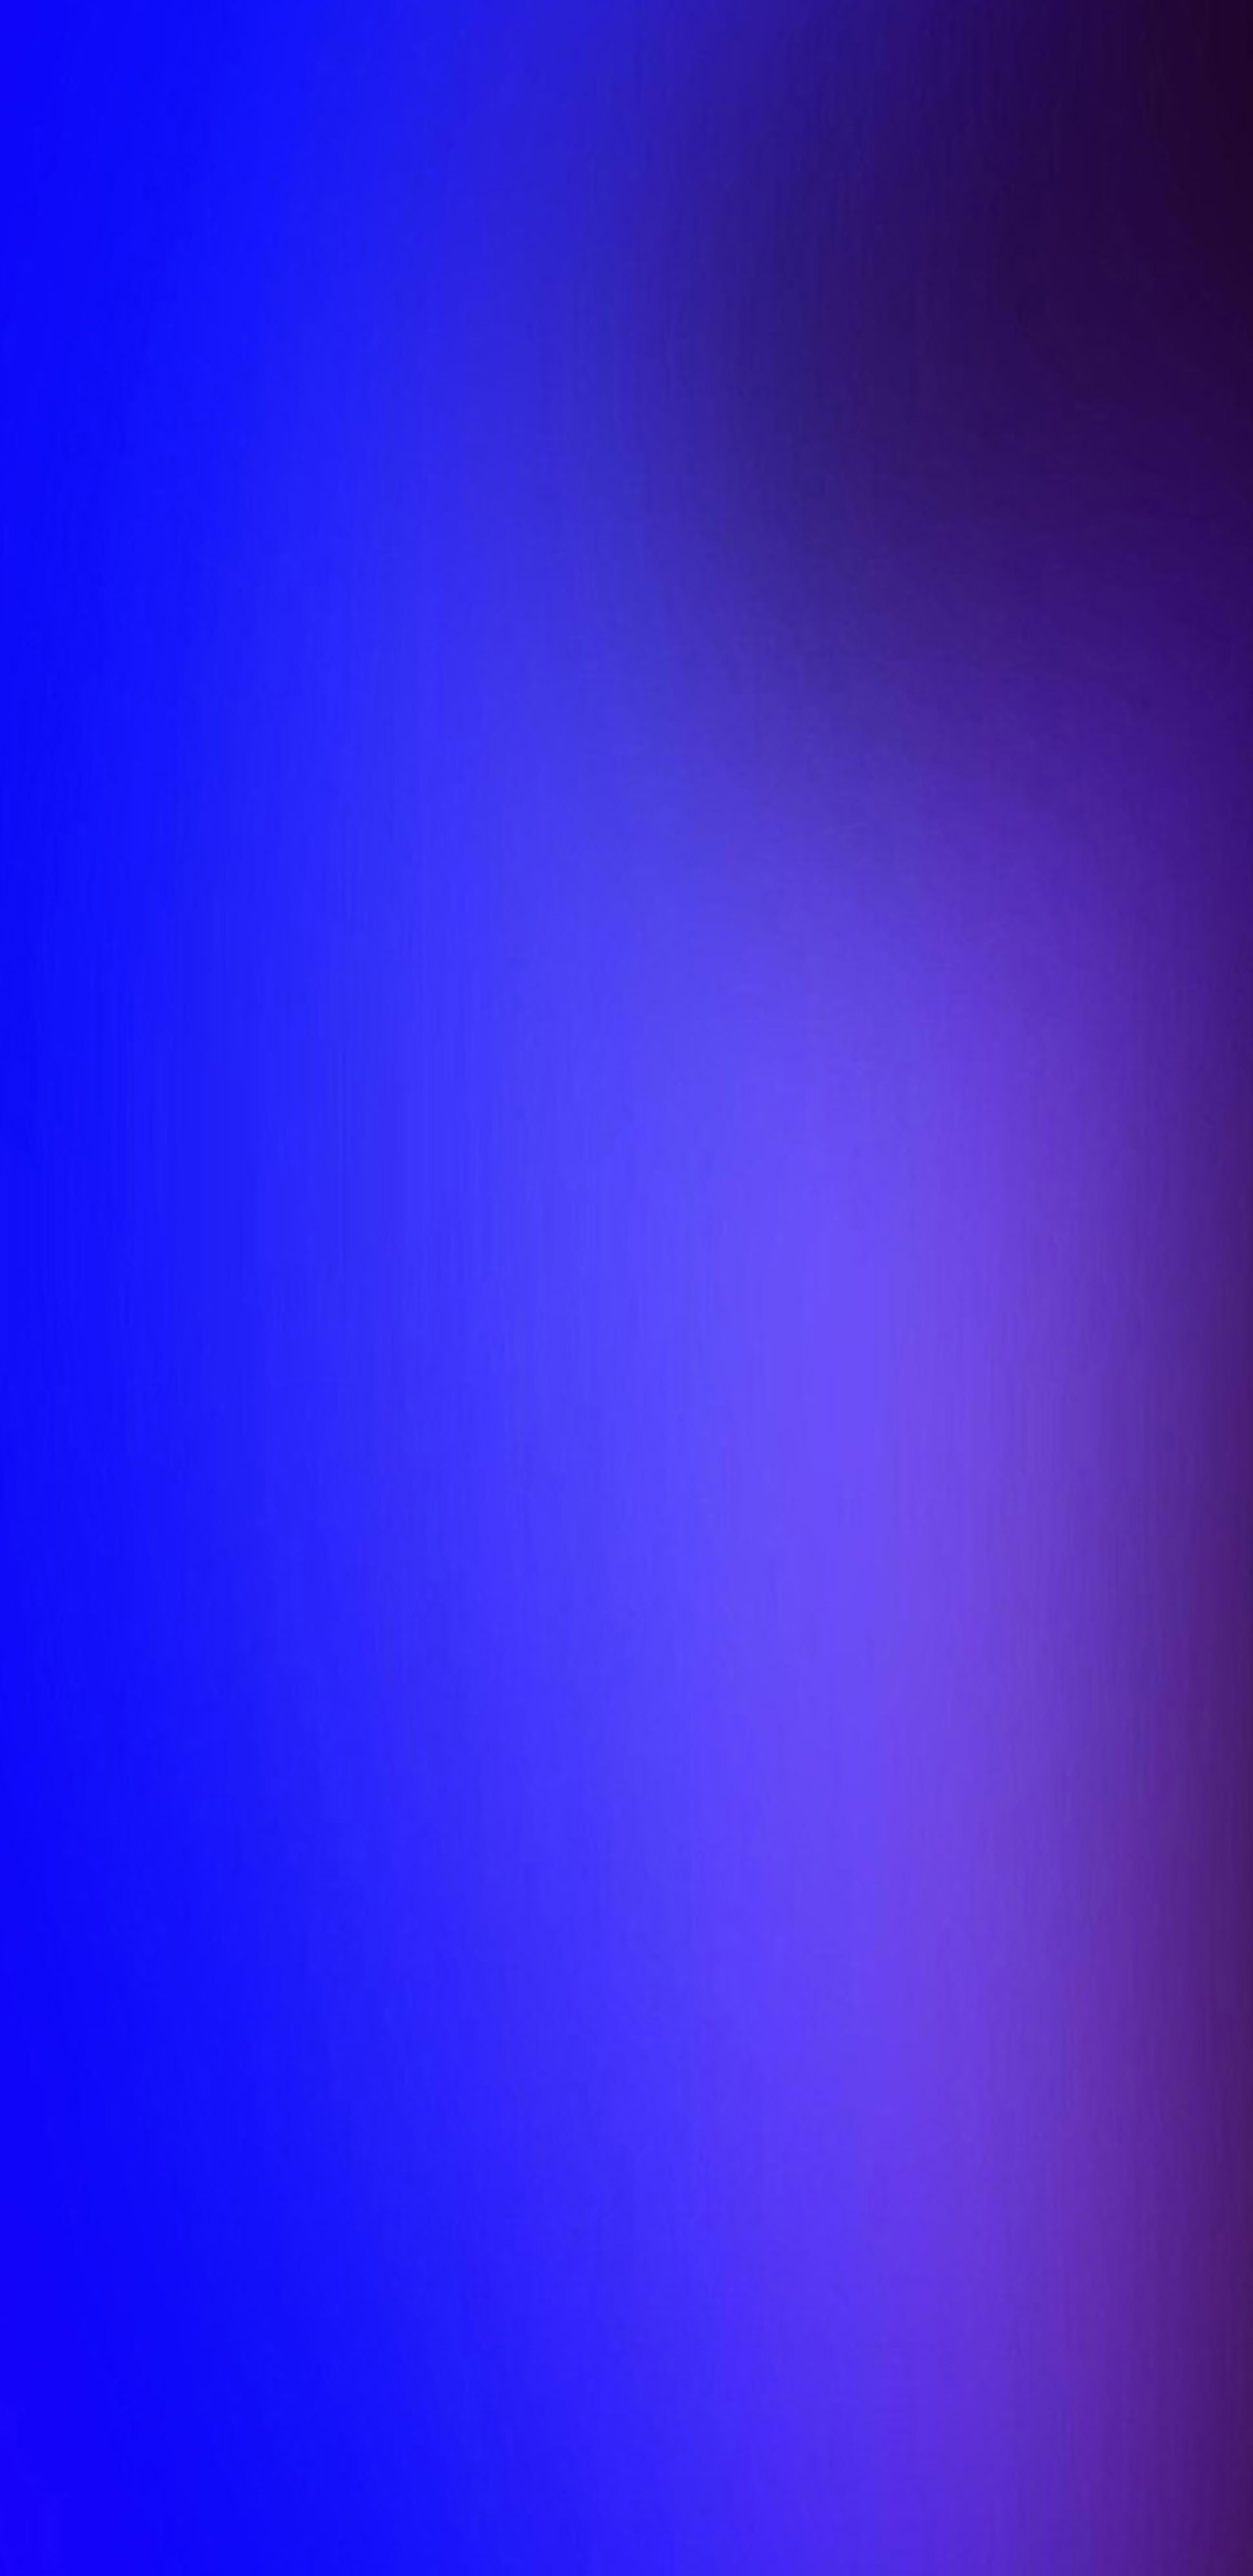 1440x2960 1080x1920 simple blue iPhone 6 wallpapers HD - 6 Plus backgrounds